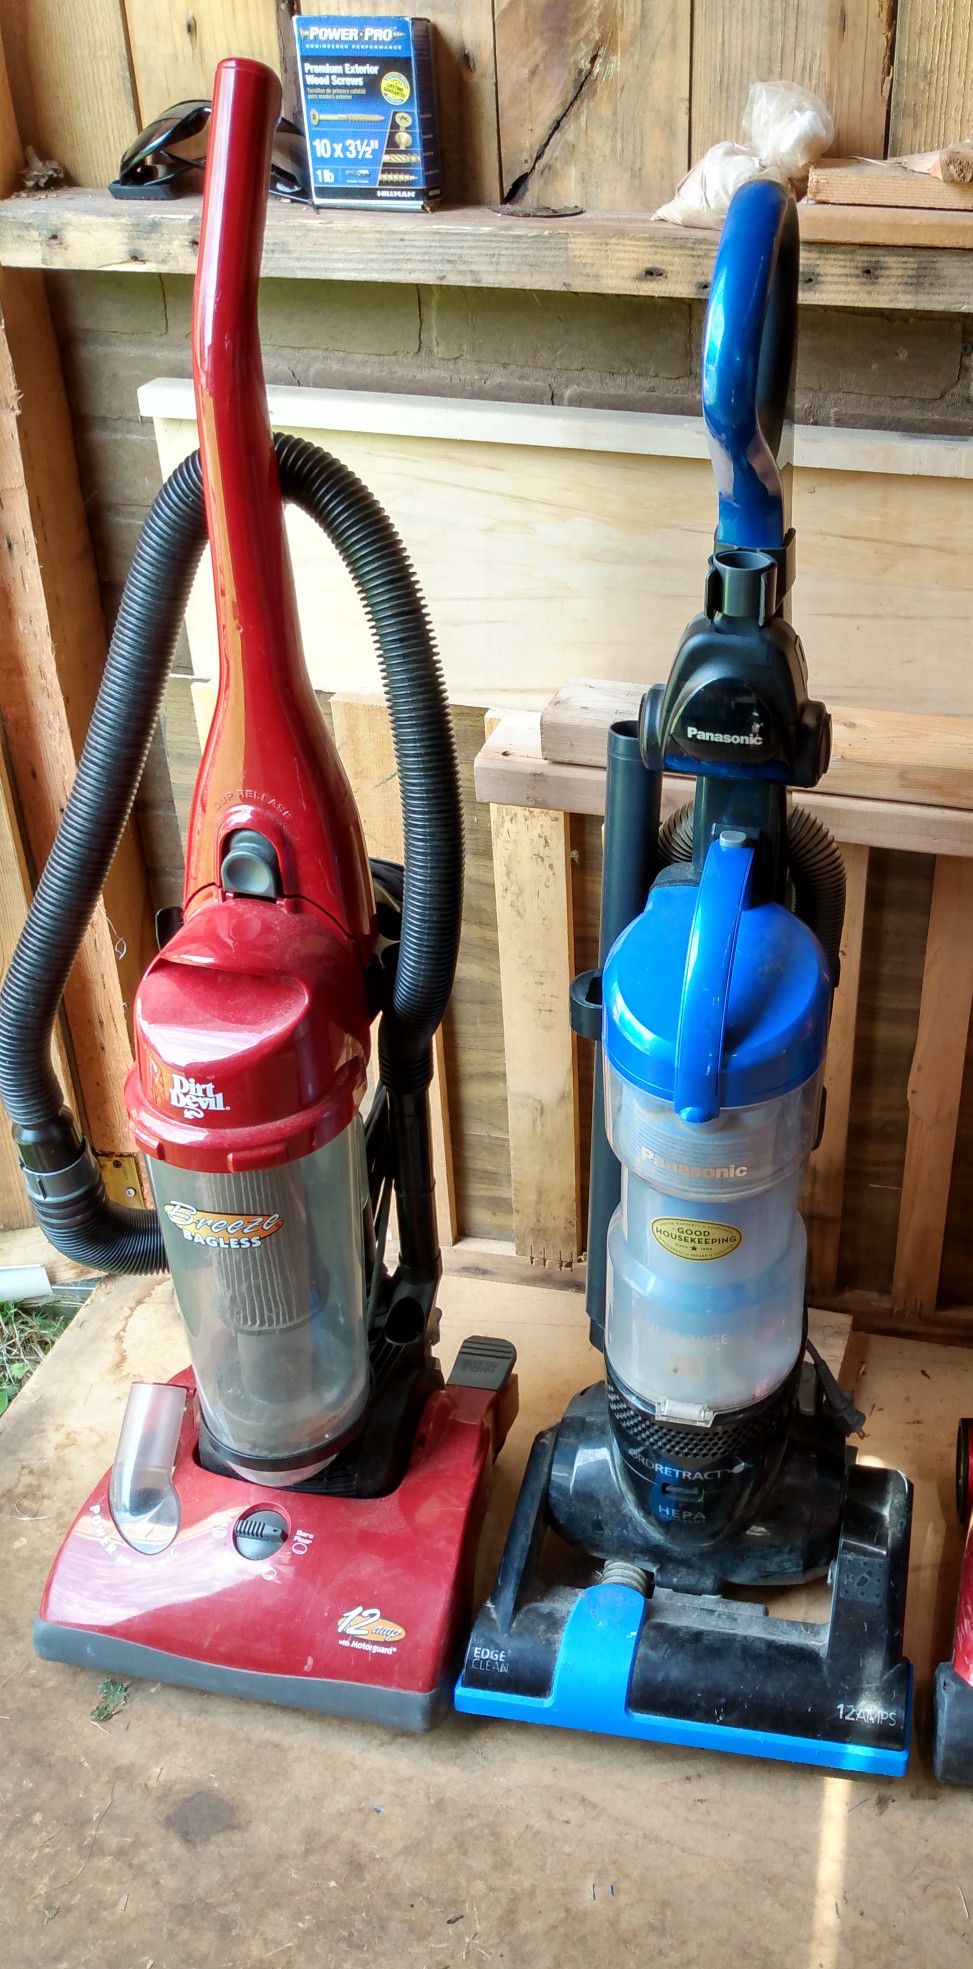 2 Vacuums, sometimes they work and sometimes they don't.